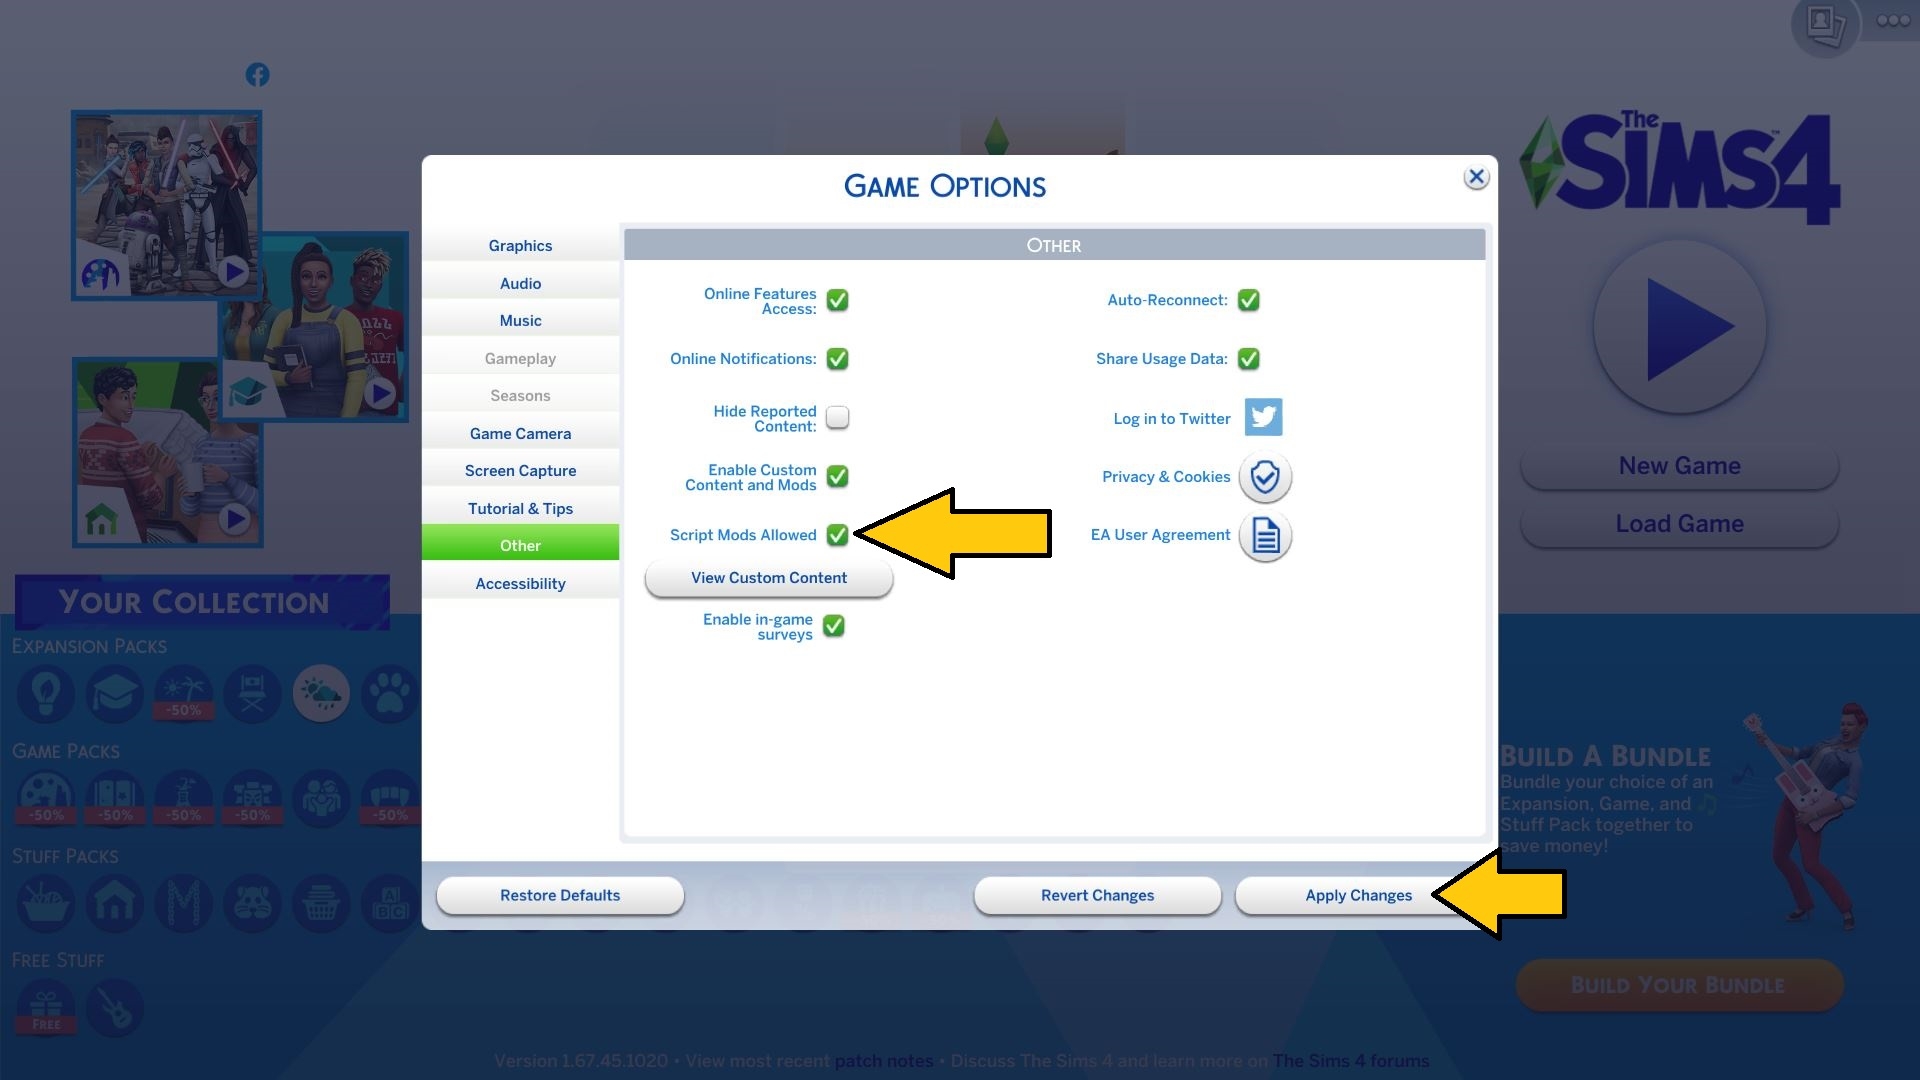 The Sims Resource - Weather and Forecast Cheat Menu